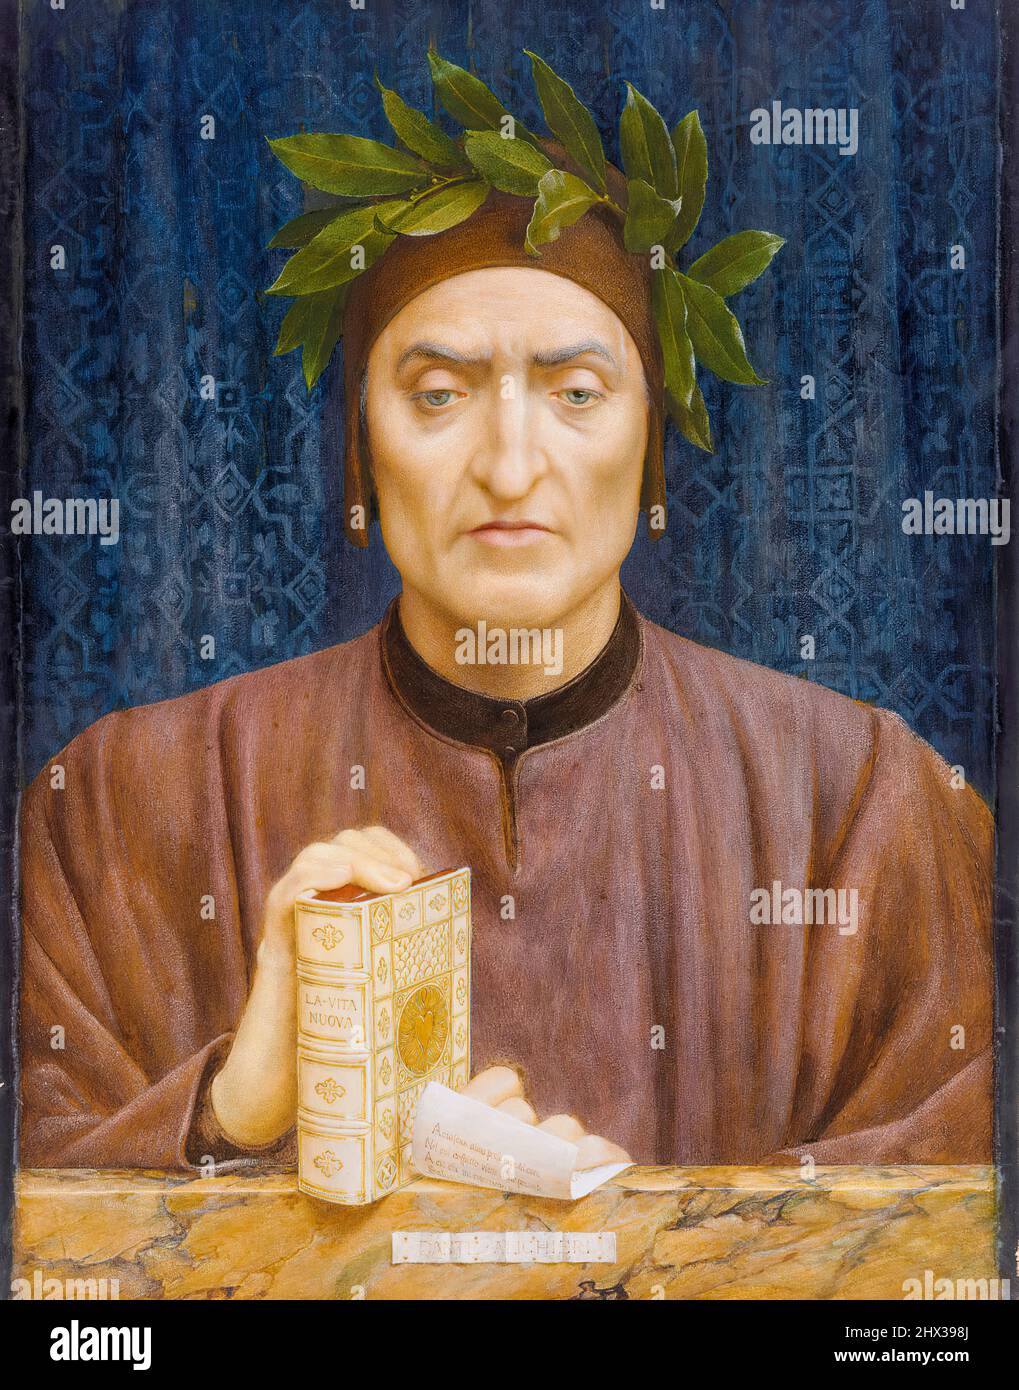 Dante Alighieri (circa 1265-1321), watercolour and bodycolour over pencil on paper, portrait painting by Henry James Holiday, before 1875 Stock Photo